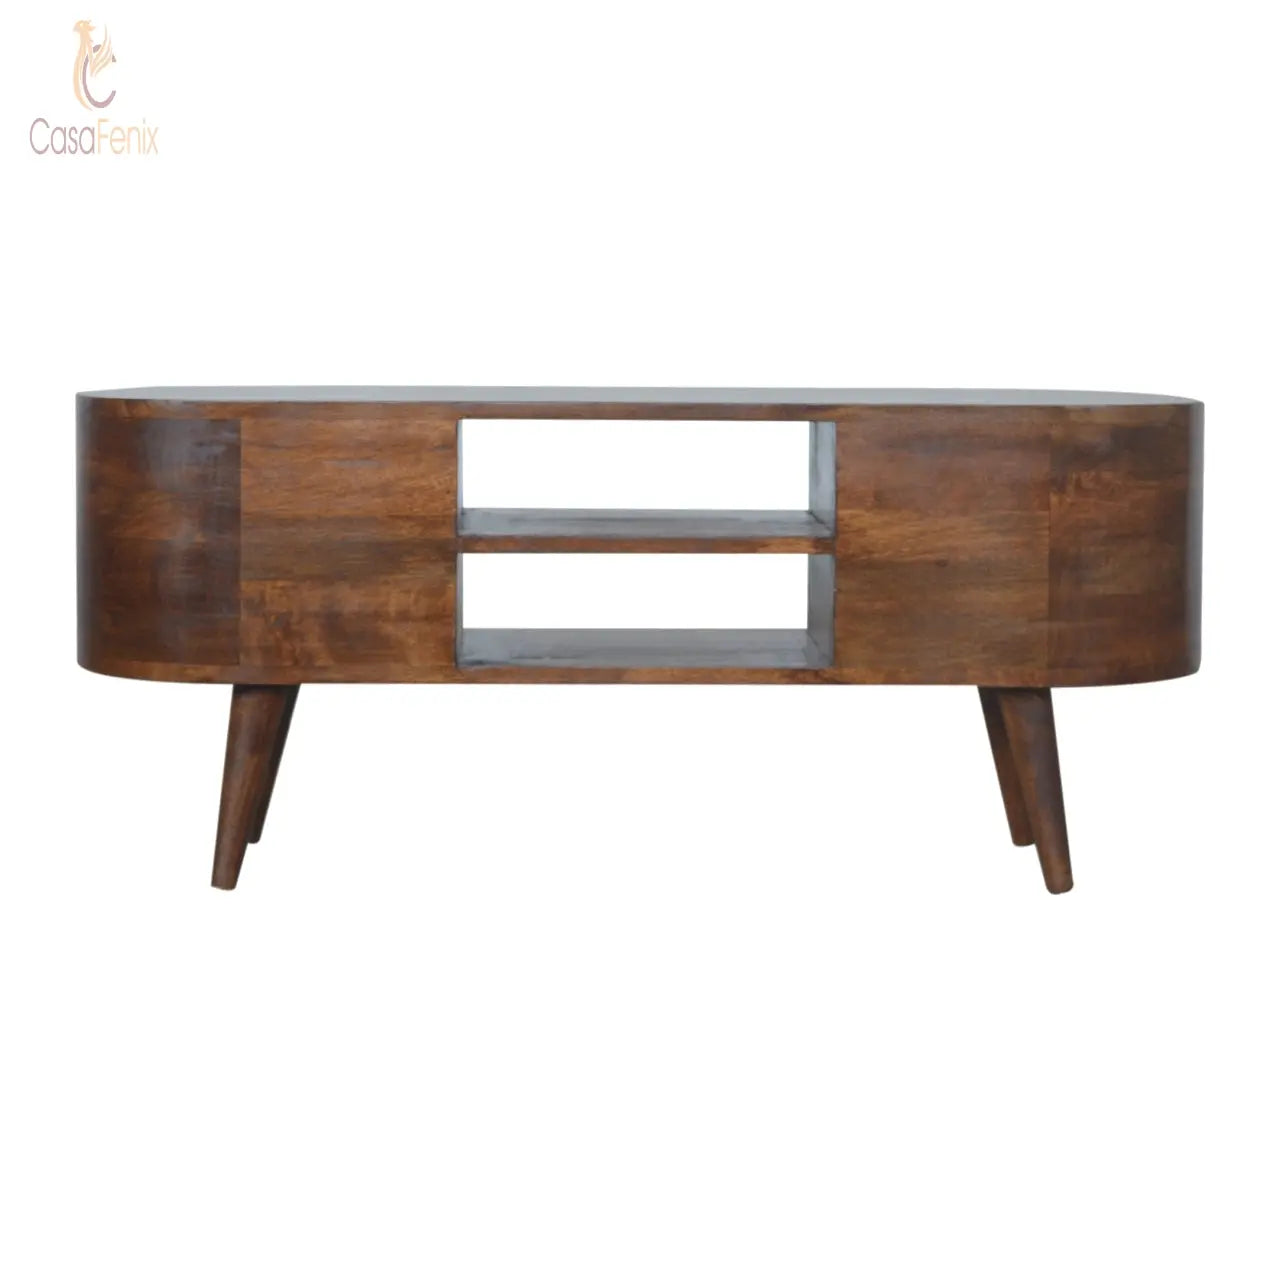 Chestnut Rounded Entertainment Unit 4 Drawer TV Stand Entertainment Centers & TV Stands CasaFenix